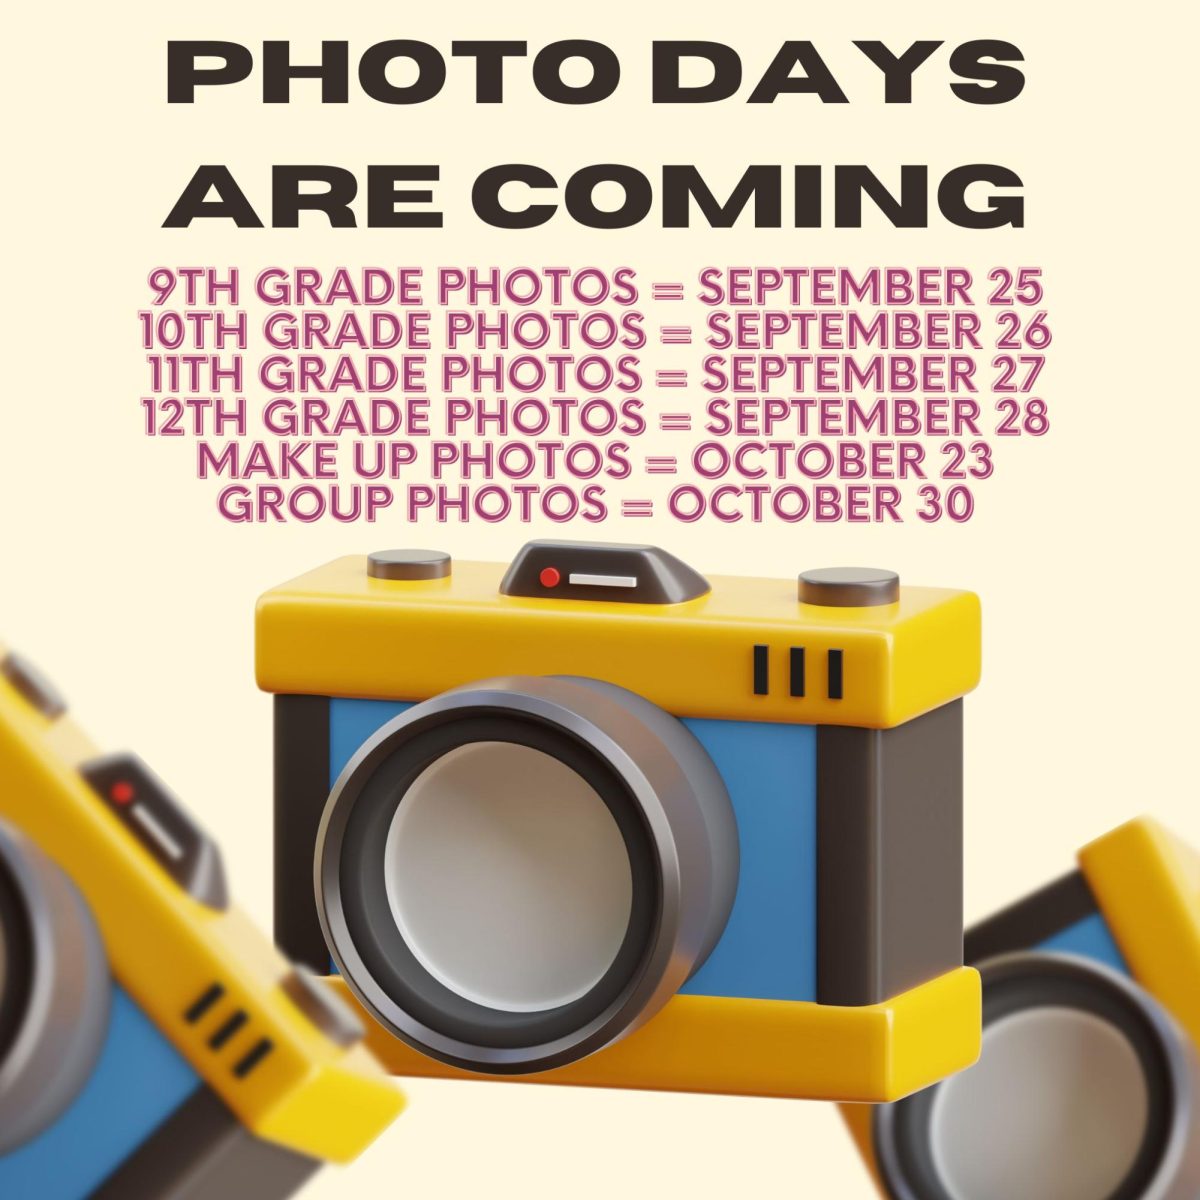 School+pictures+scheduled+for+last+week+of+September